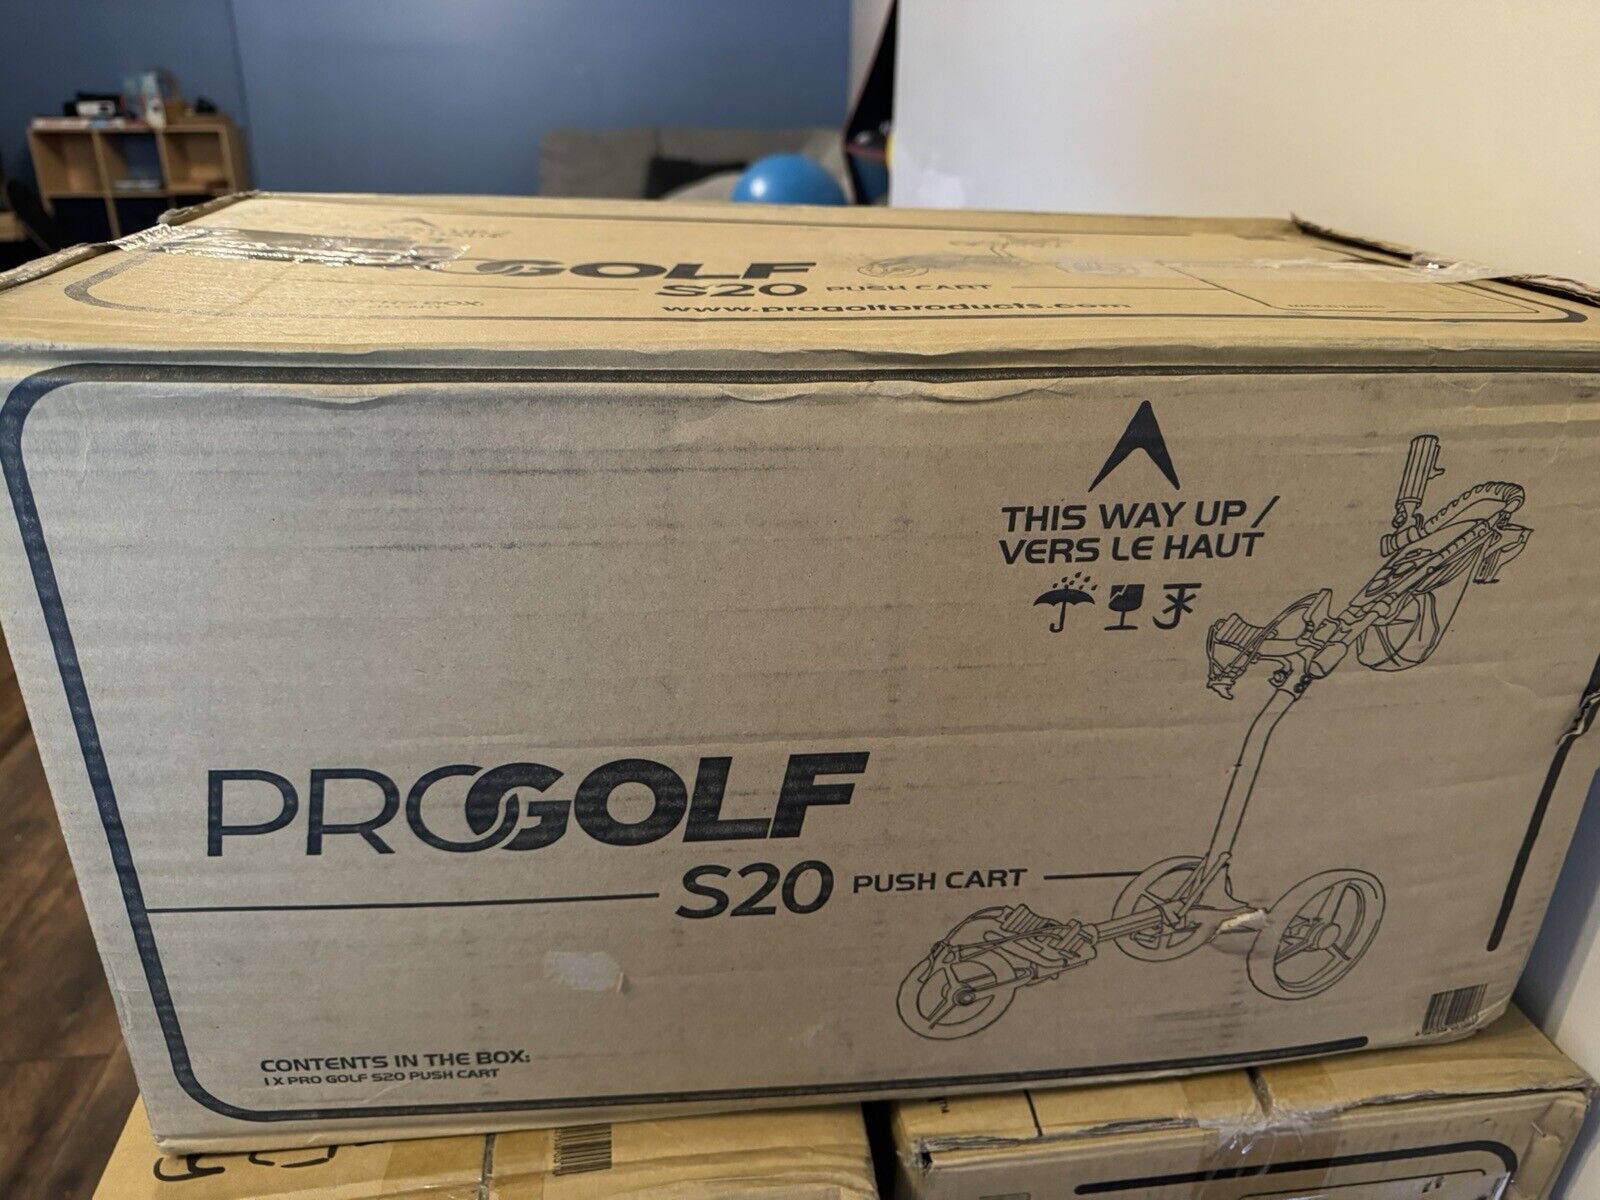 Pro Golf S20 3 Wheel Push Cart - Easy to Fold System - Lightweight 15.0 LBS NEW